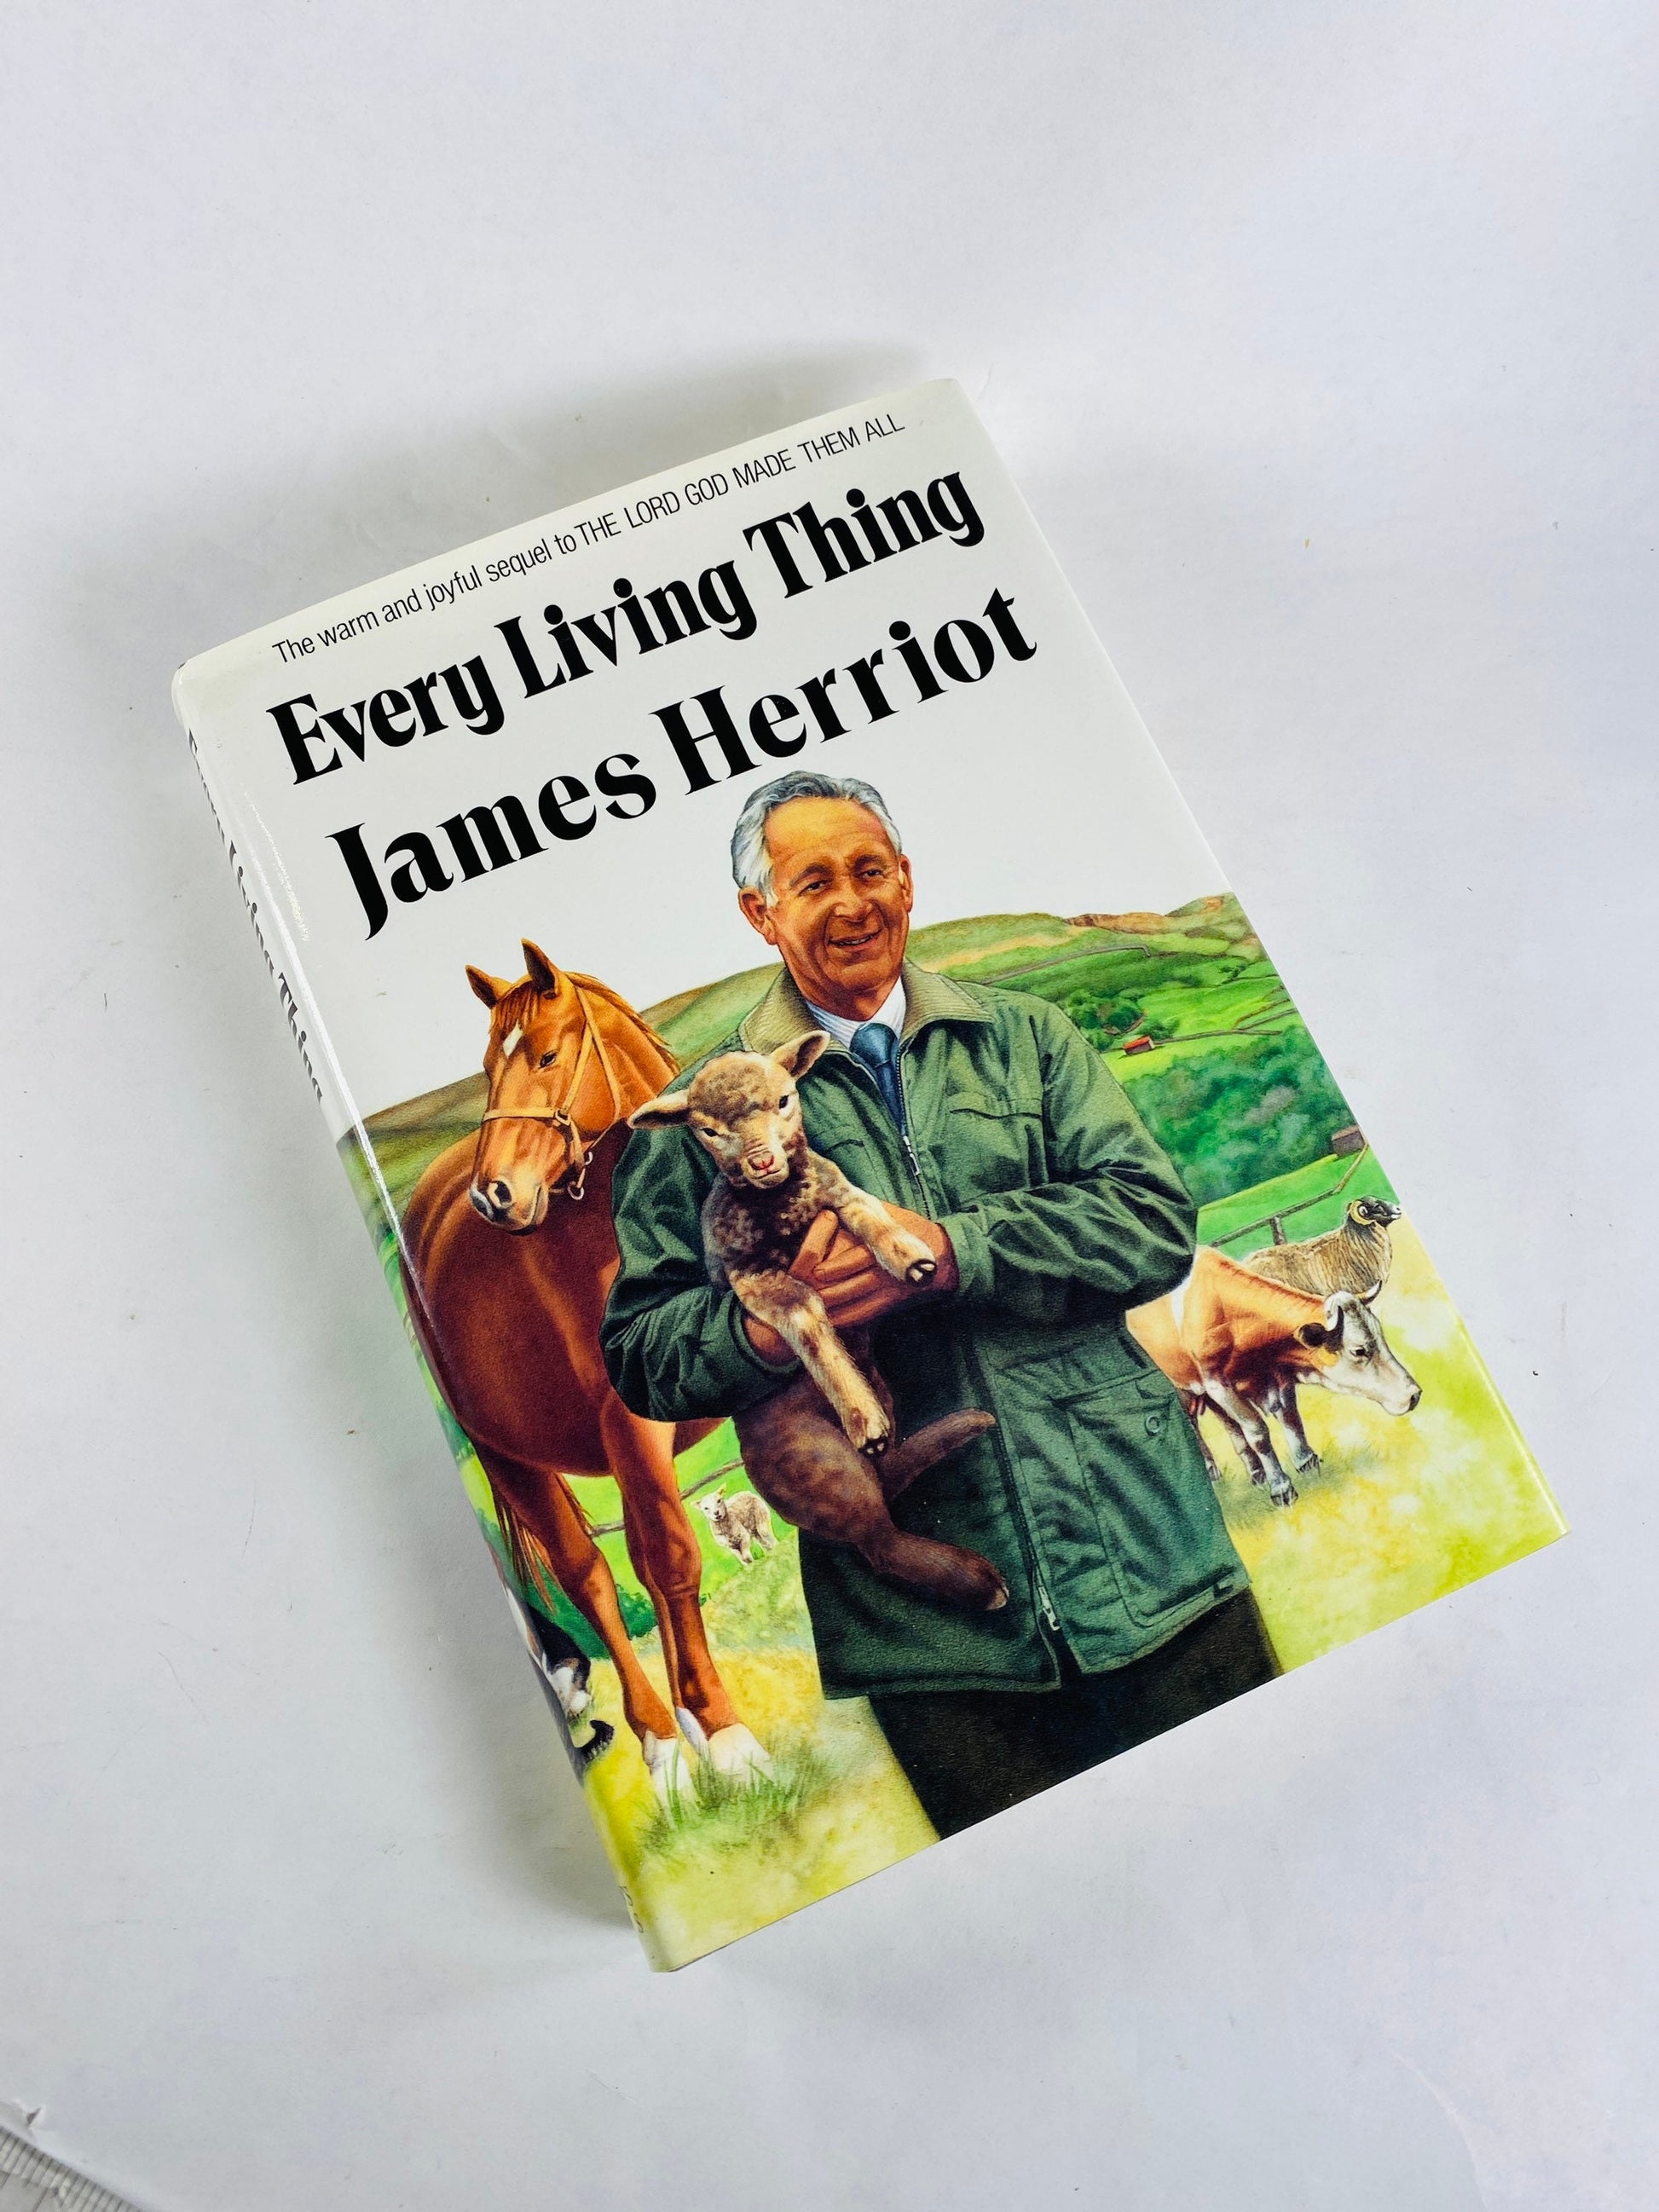 All Creatures Big & Small Wise Wonderful Every Living Thing James Herriot 1992 BBC vintage British book gift Veterinarian Heriot